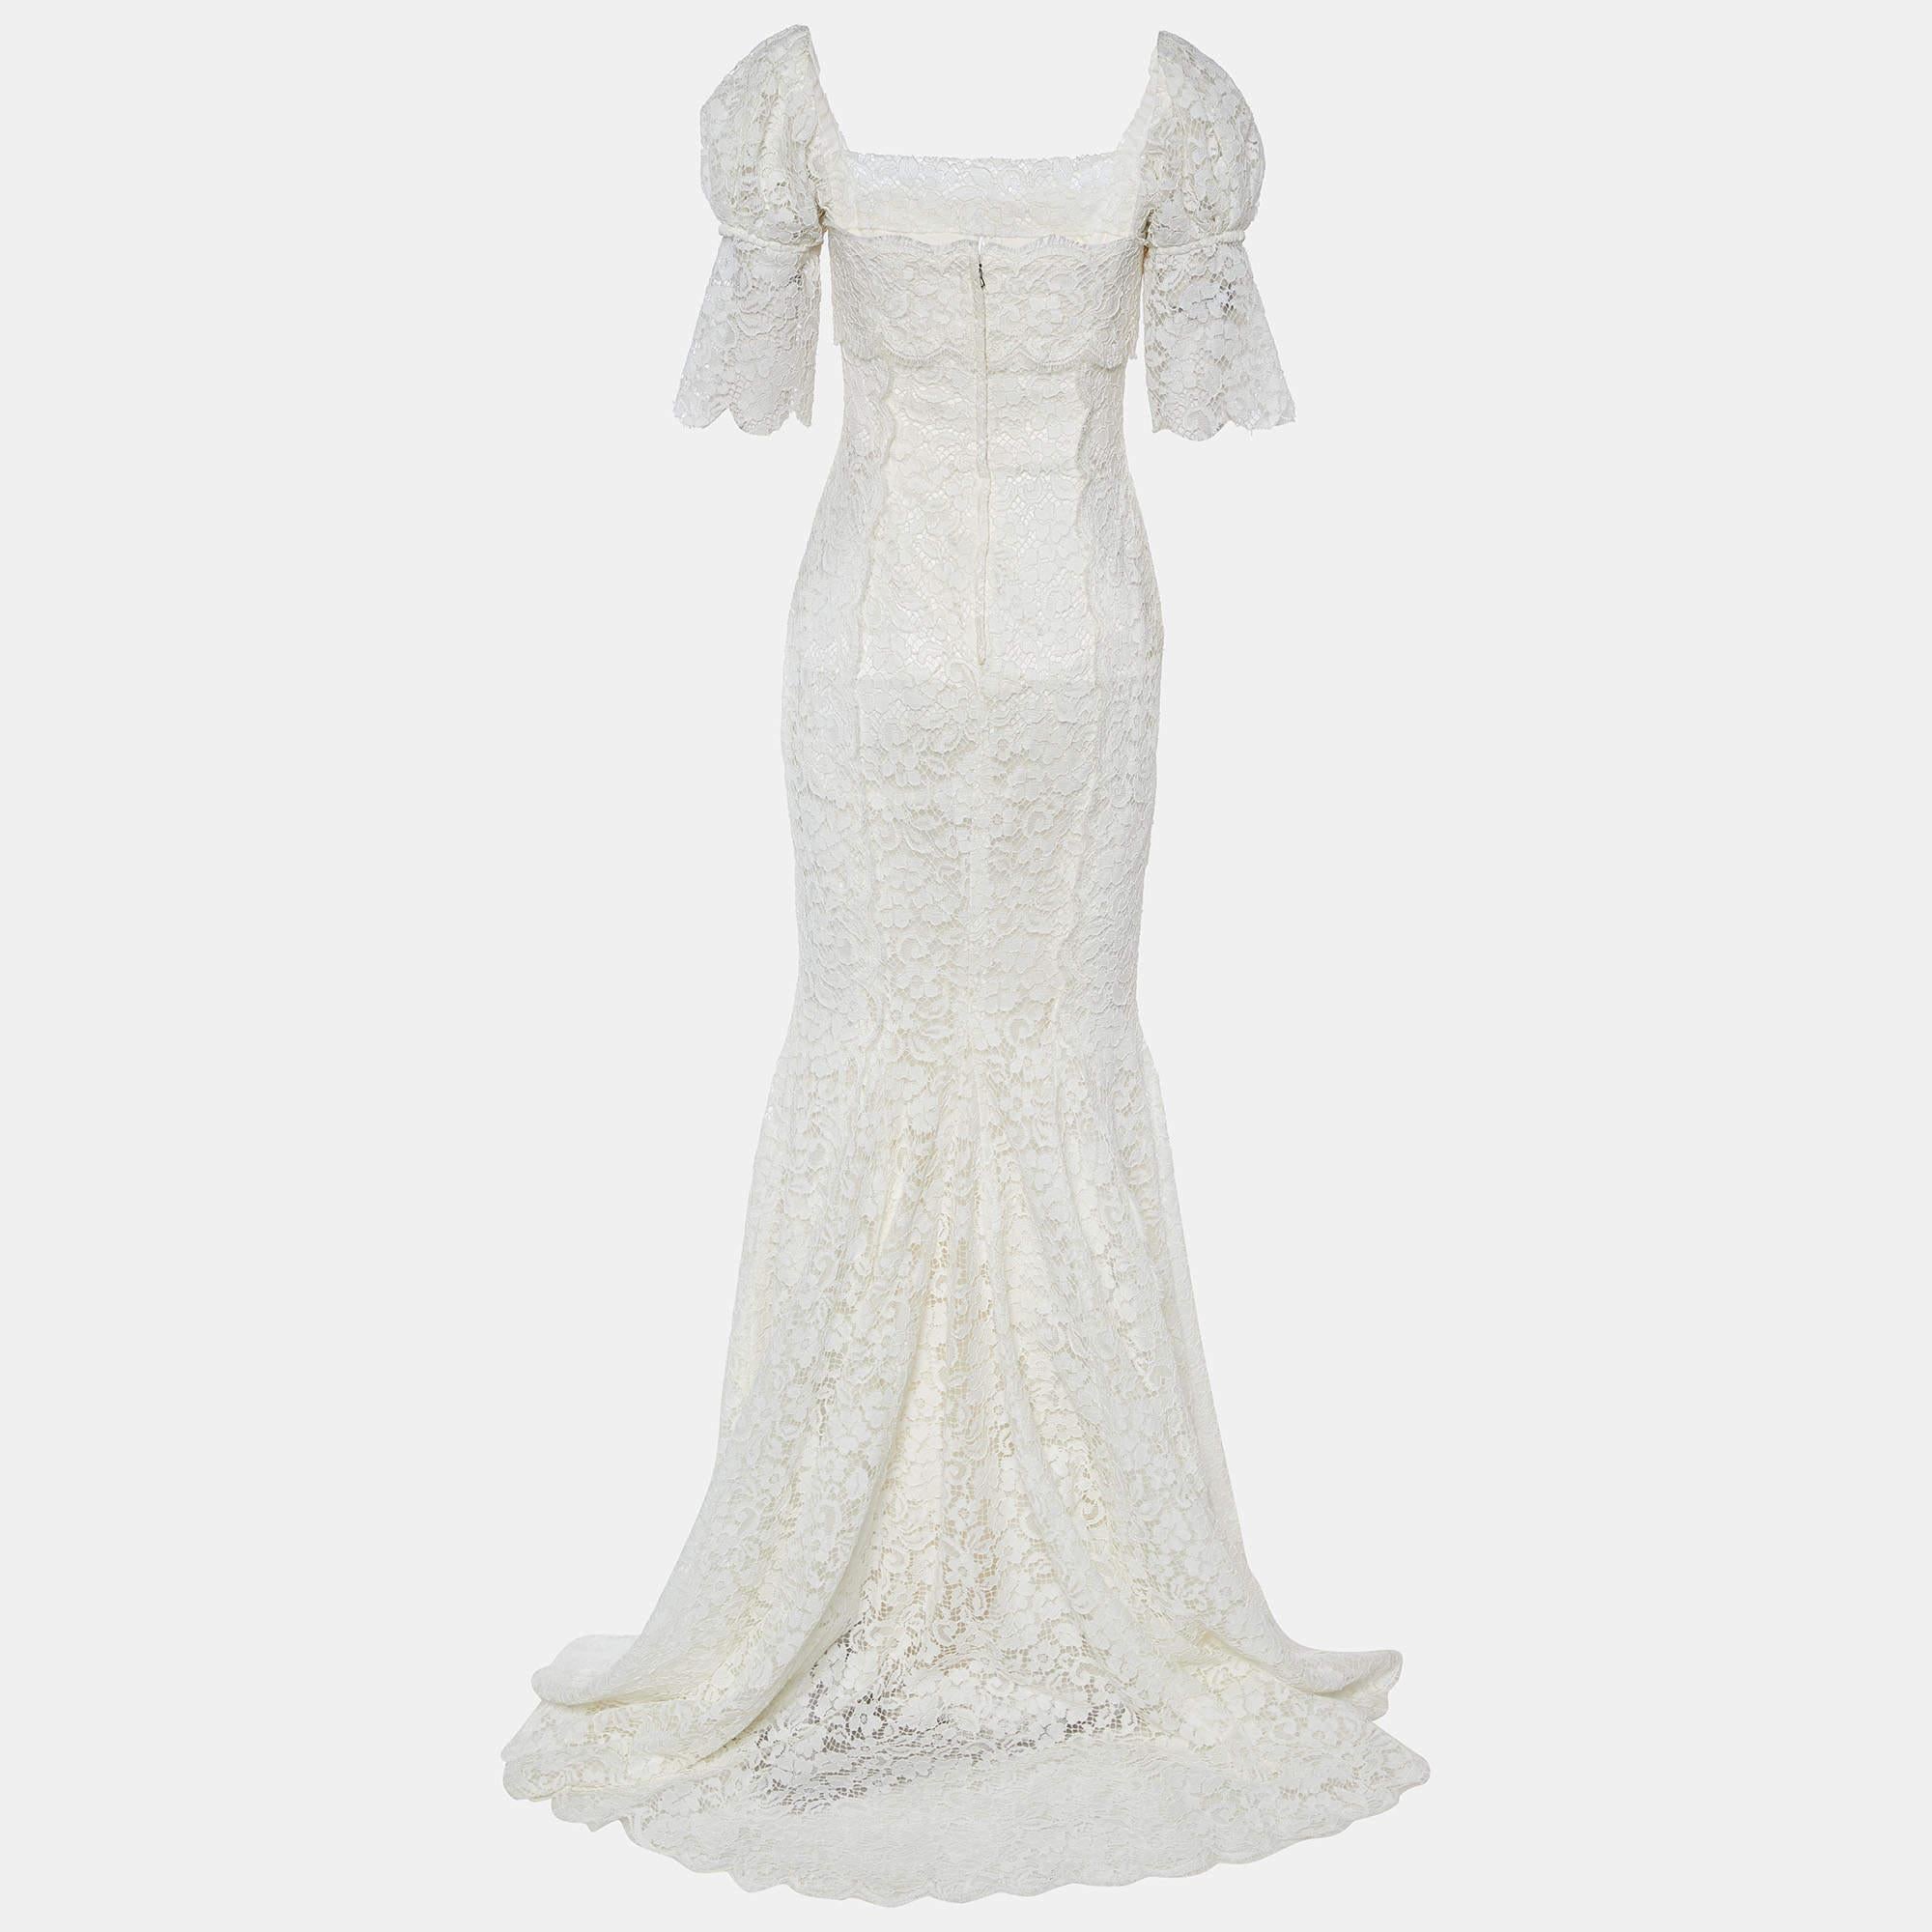 The Dolce & Gabbana wedding gown is an exquisite masterpiece of bridal fashion. Crafted from luxurious white lace, this gown features intricate ruching that accentuates the bride's curves, while a trail adds a touch of elegance. With its romantic